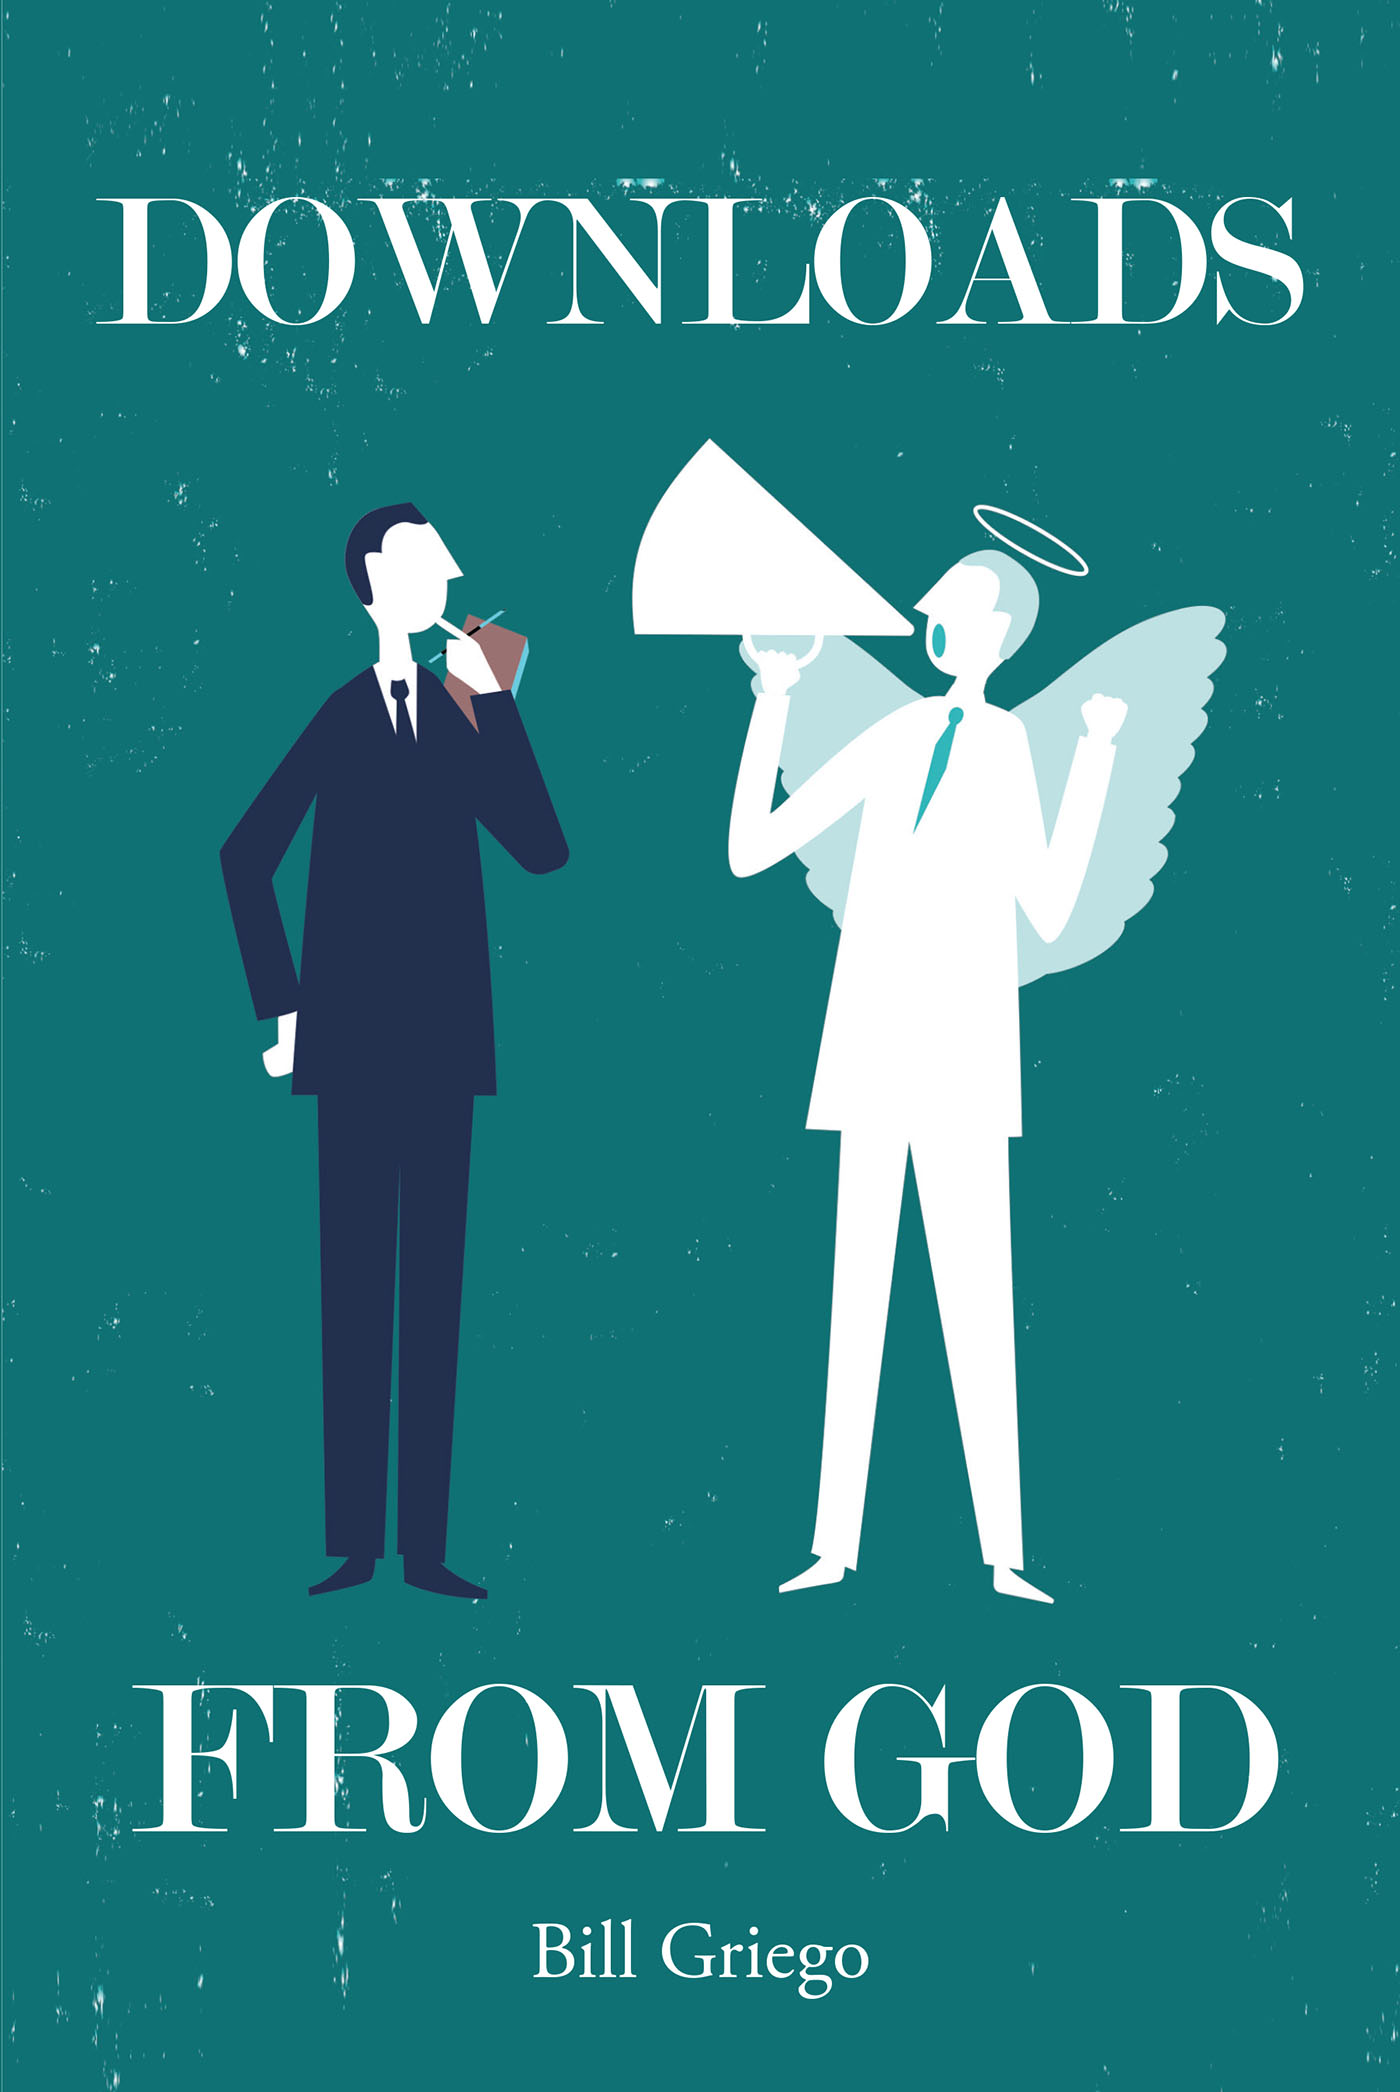 Author Bill Griego’s Newly Released "Downloads from God" is a Stirring and Engaging Assortment of Poems to Inspire Readers to Grow in Their Faith and Christ's Teachings